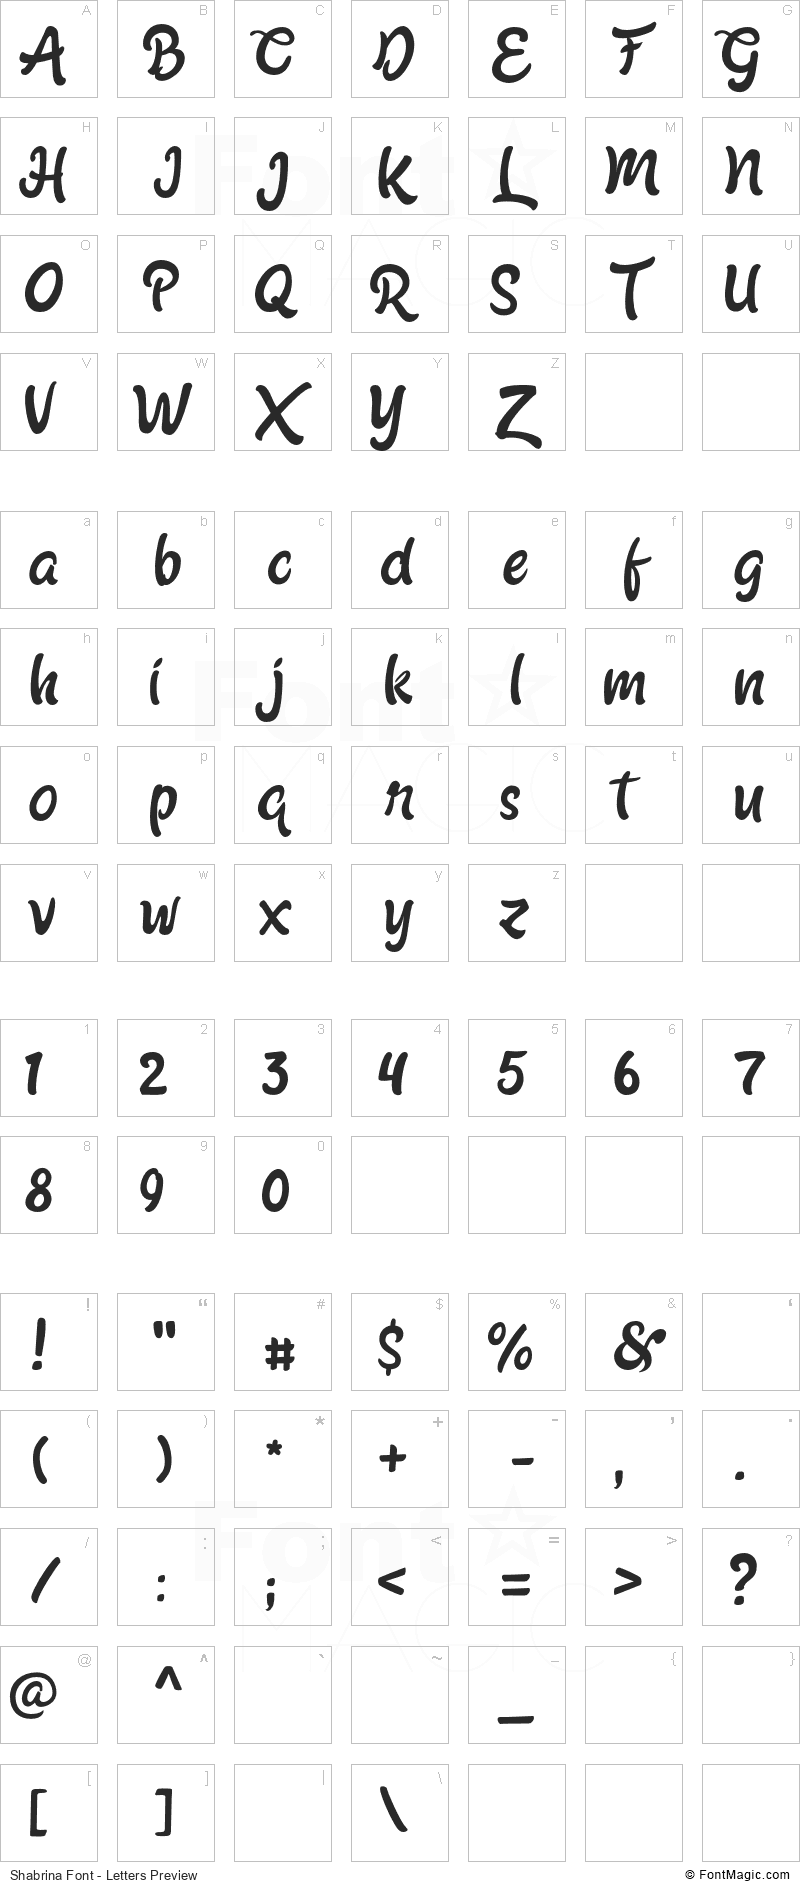 Shabrina Font - All Latters Preview Chart